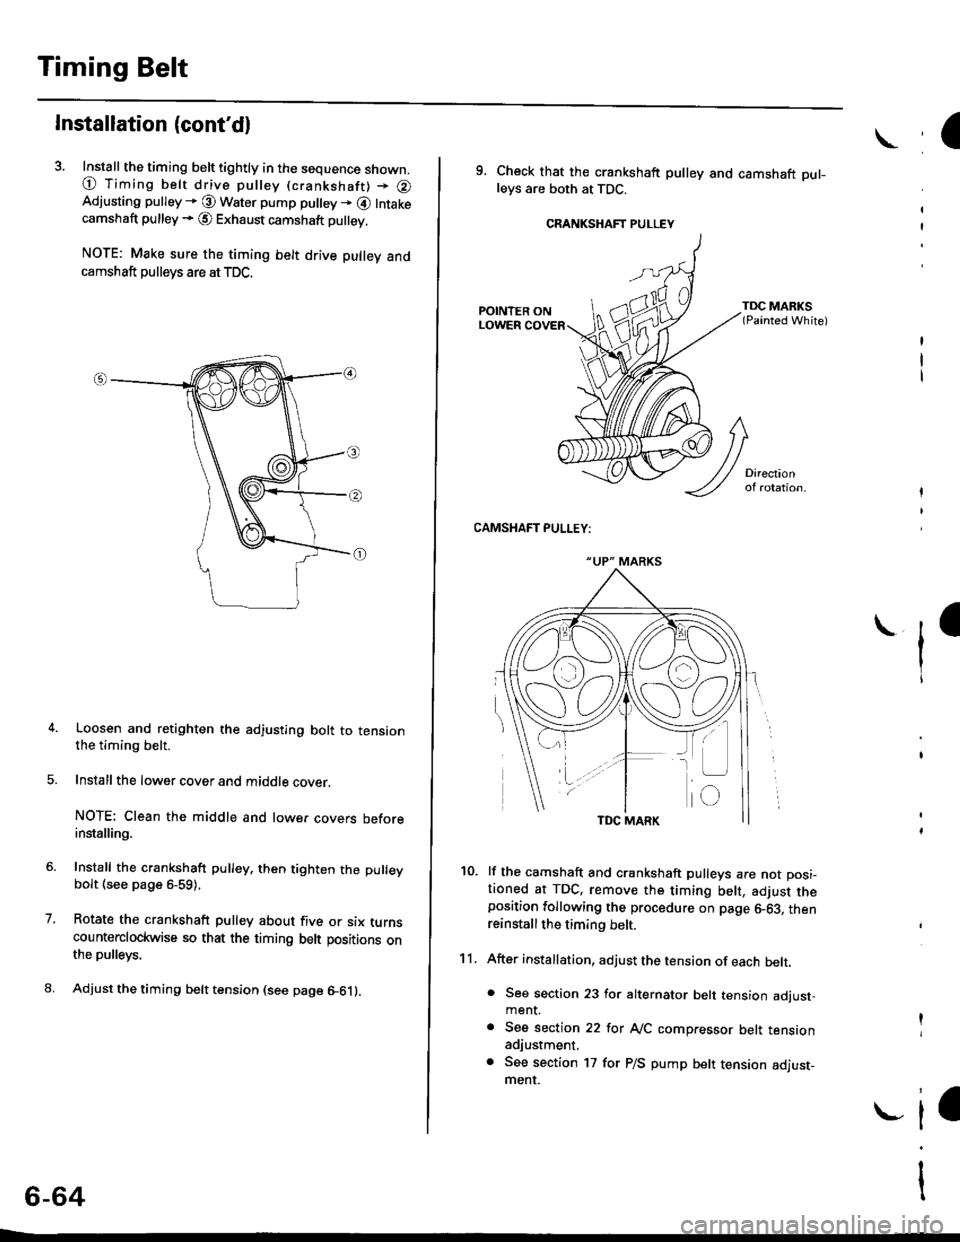 HONDA CIVIC 1996 6.G Workshop Manual Timing Belt
lnstallation (contdl
3. Install the timing belt tightly in the sequence shown.
@ Timing belt drive pulley (crankshaft) + @Adjusting pulley * @ Water pump pu ey + @ Intakecamshaft pulley +